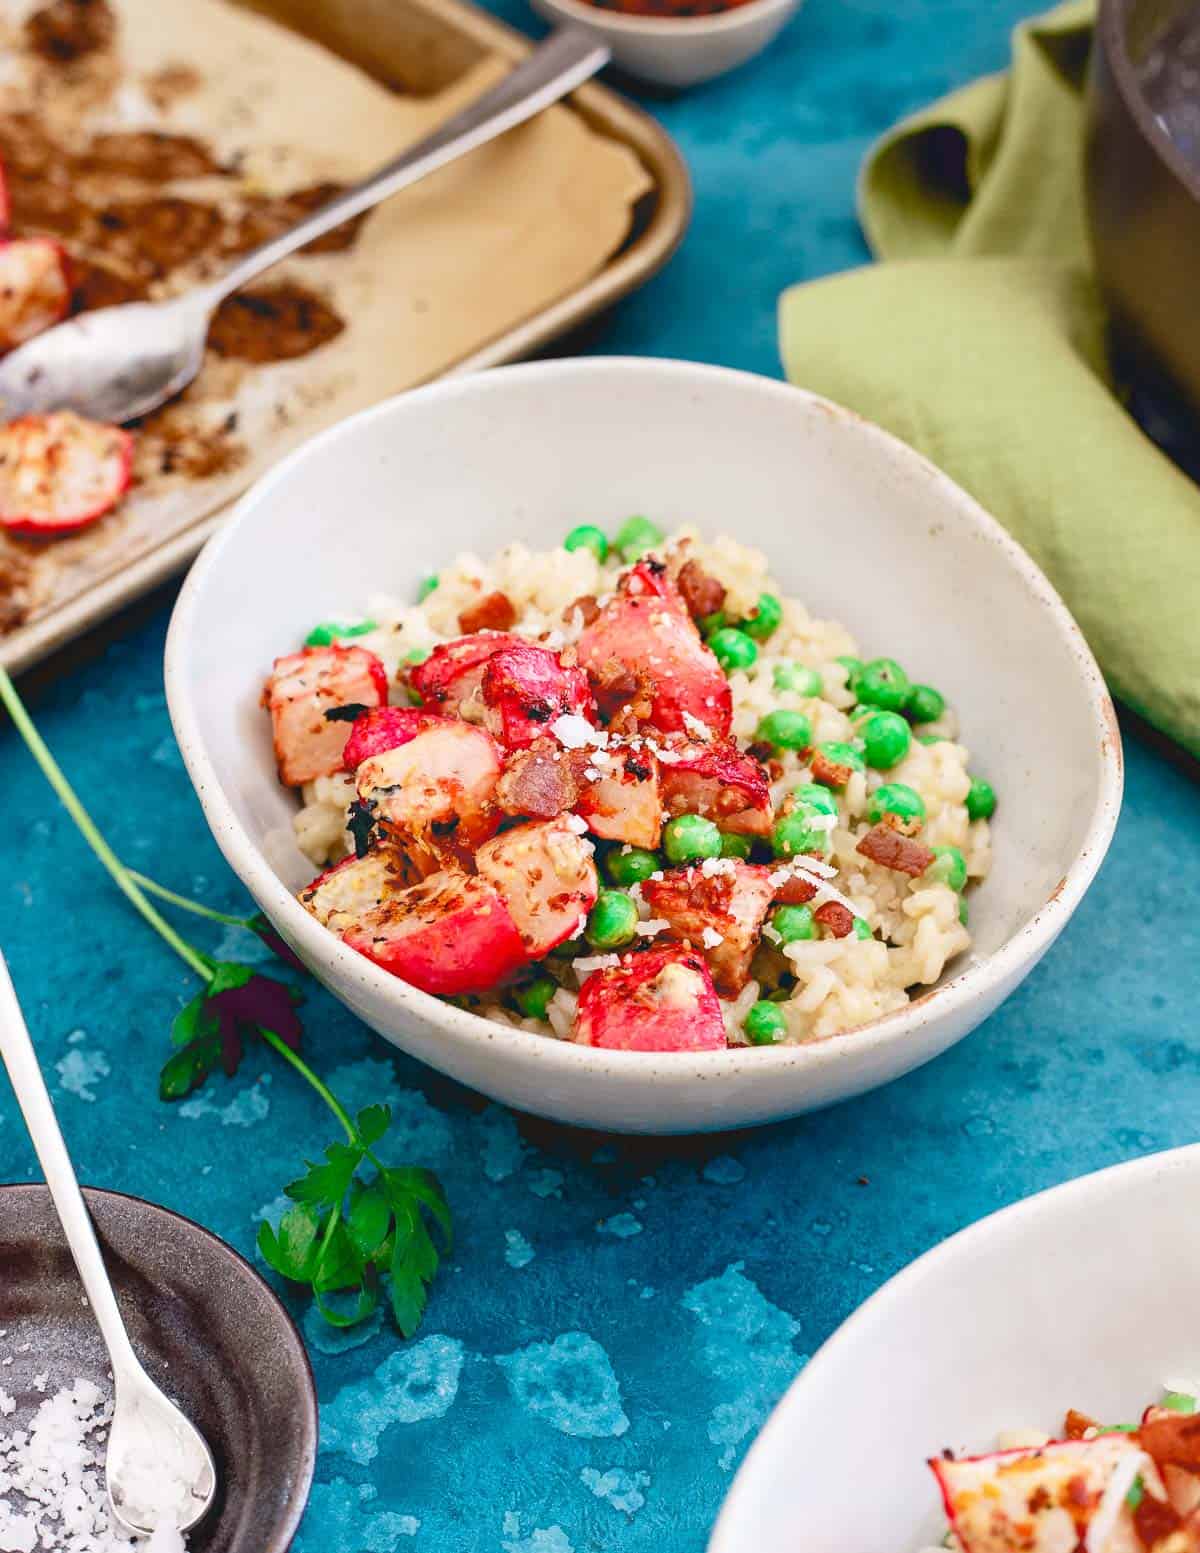 Creamy risotto meets bright lemon and mustard roasted radishes and fresh spring peas in this seasonal comfort food recipe.